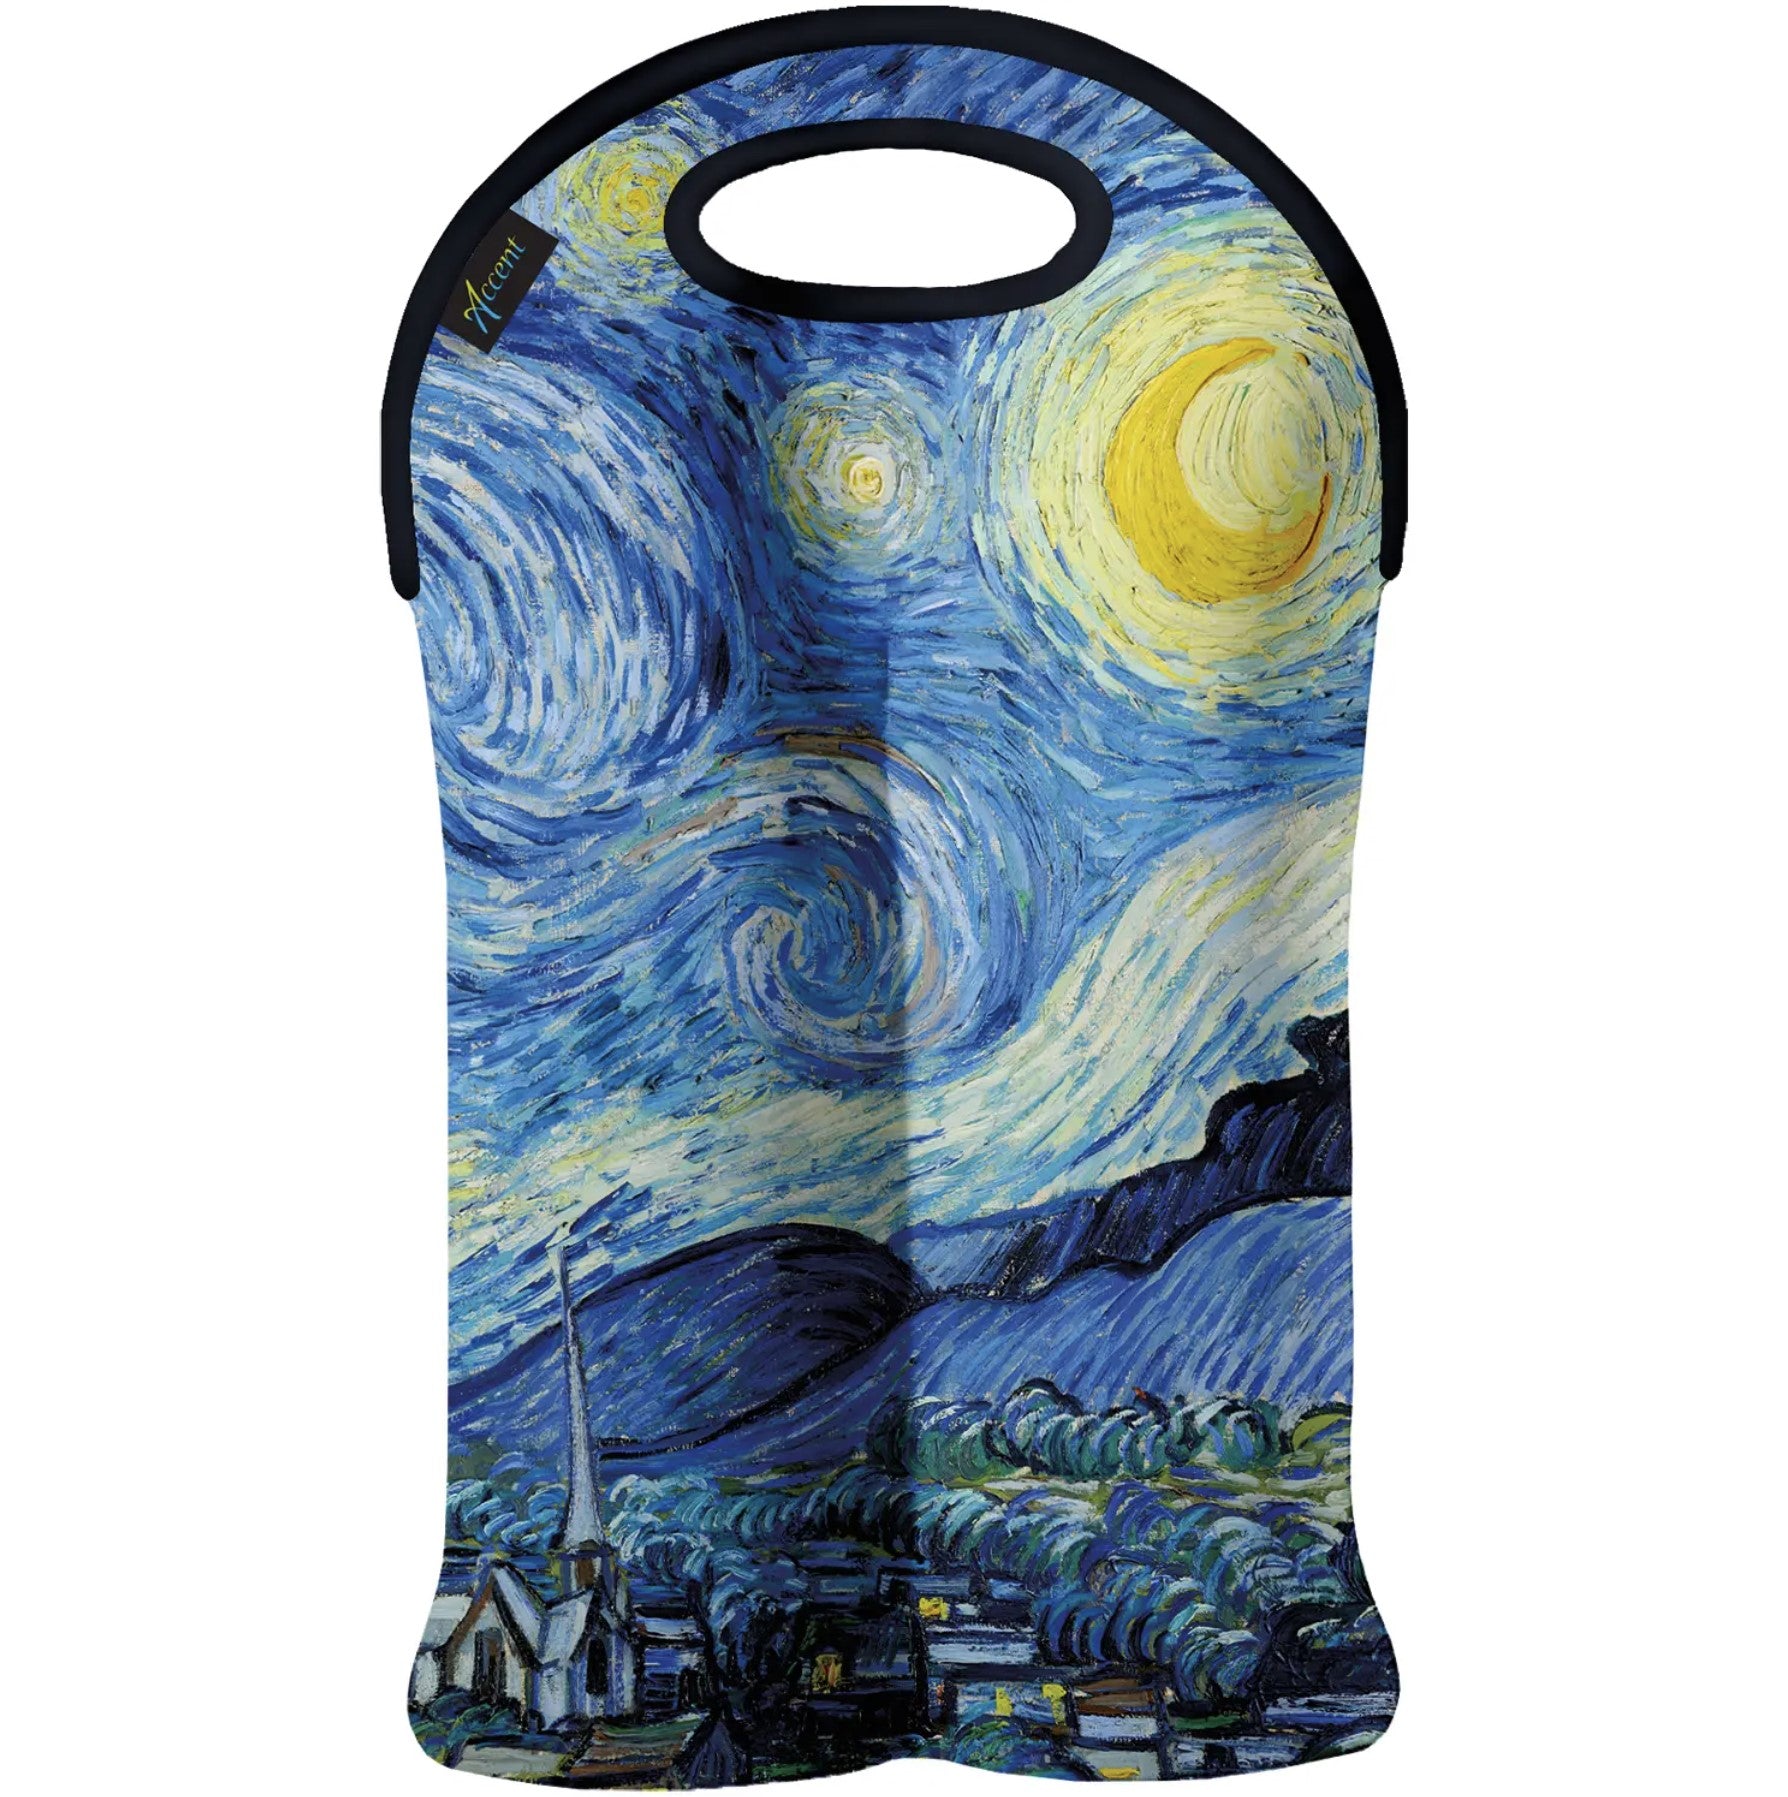 Double Wine Tote,    "Starry Night" by Vincent Van Gogh